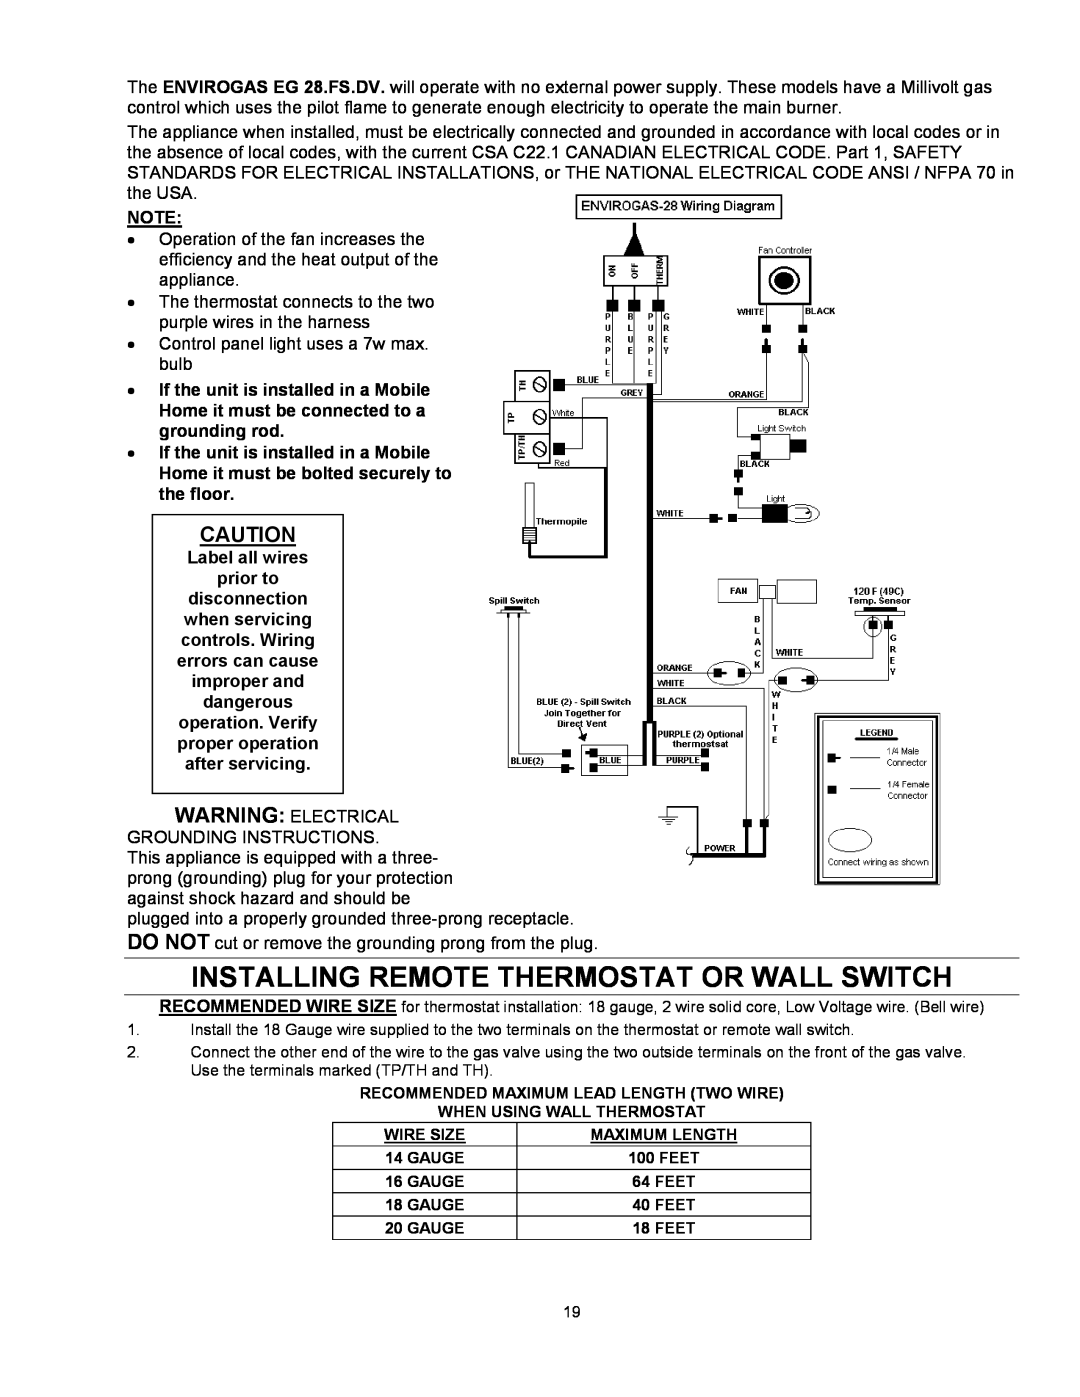 Enviro EG 28 owner manual Installing Remote Thermostat Or Wall Switch 